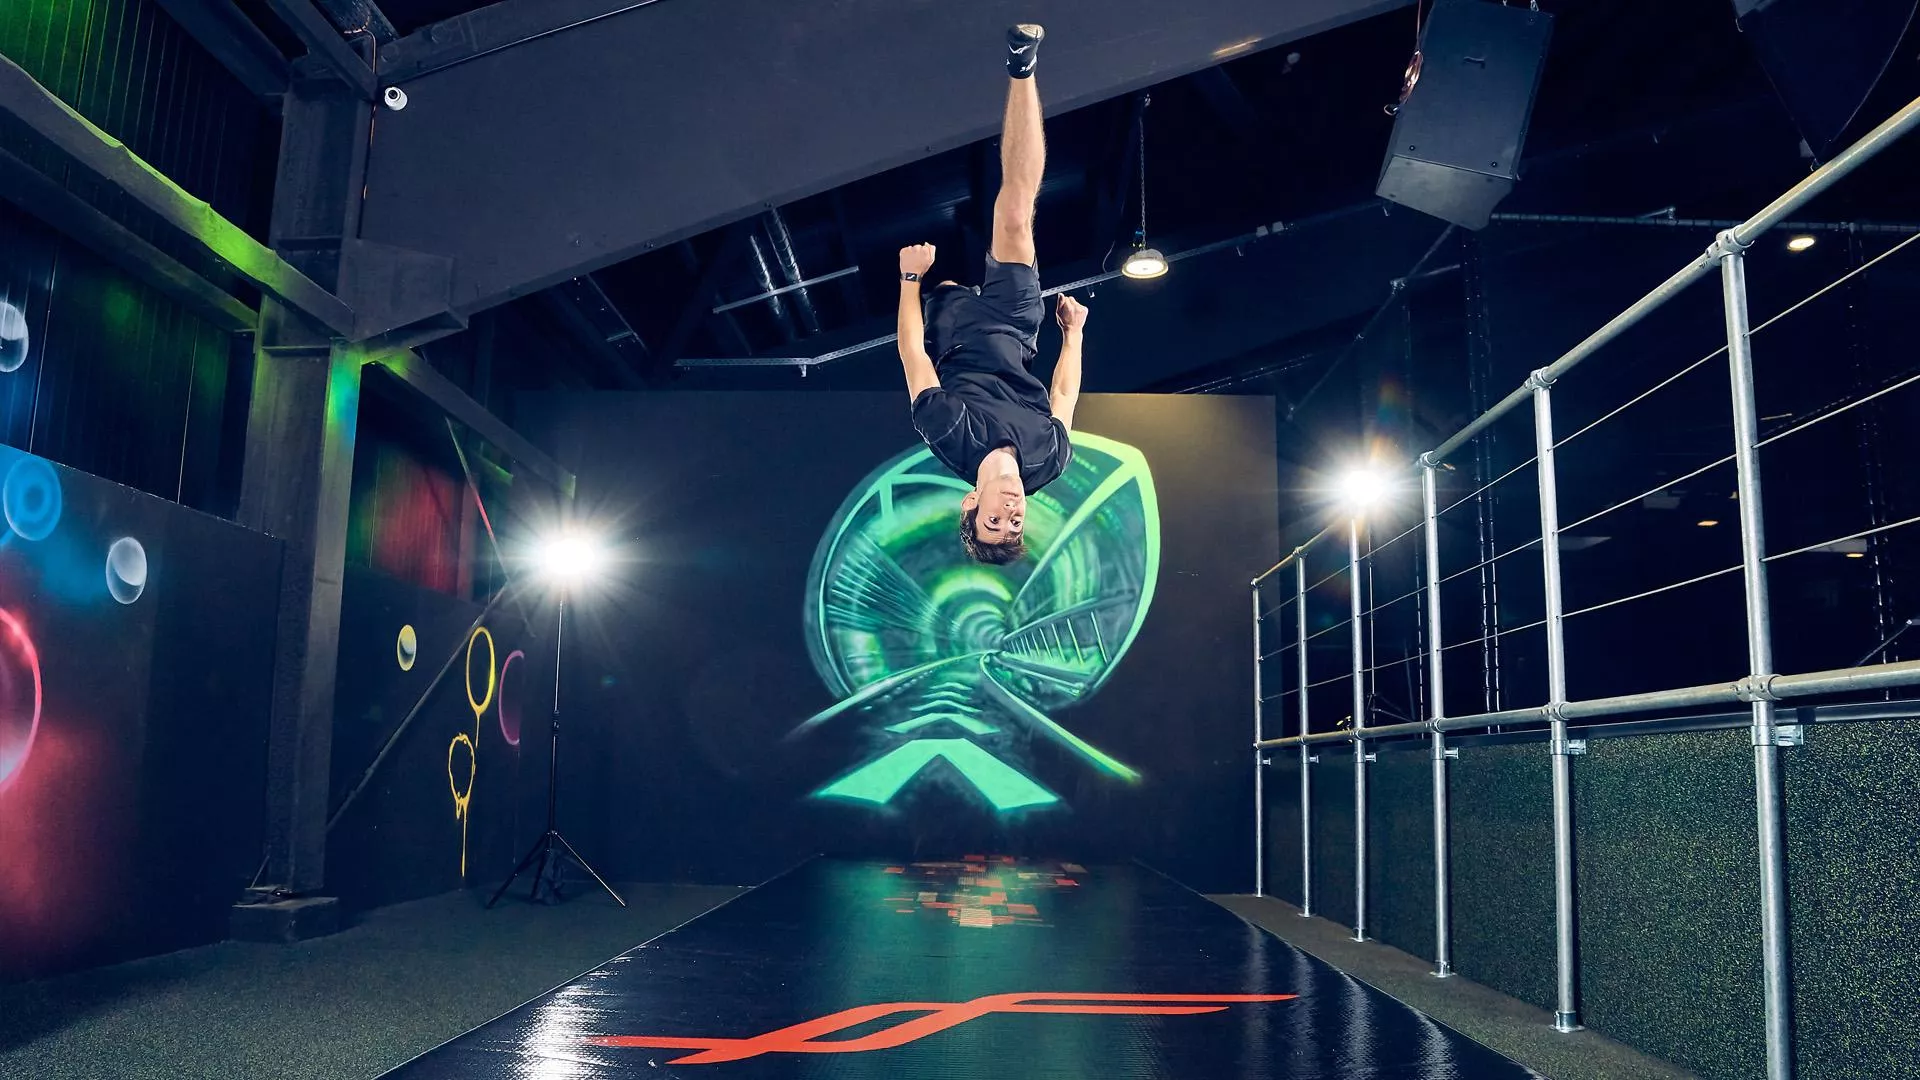  Kafle trampoline park attractions - Air Track